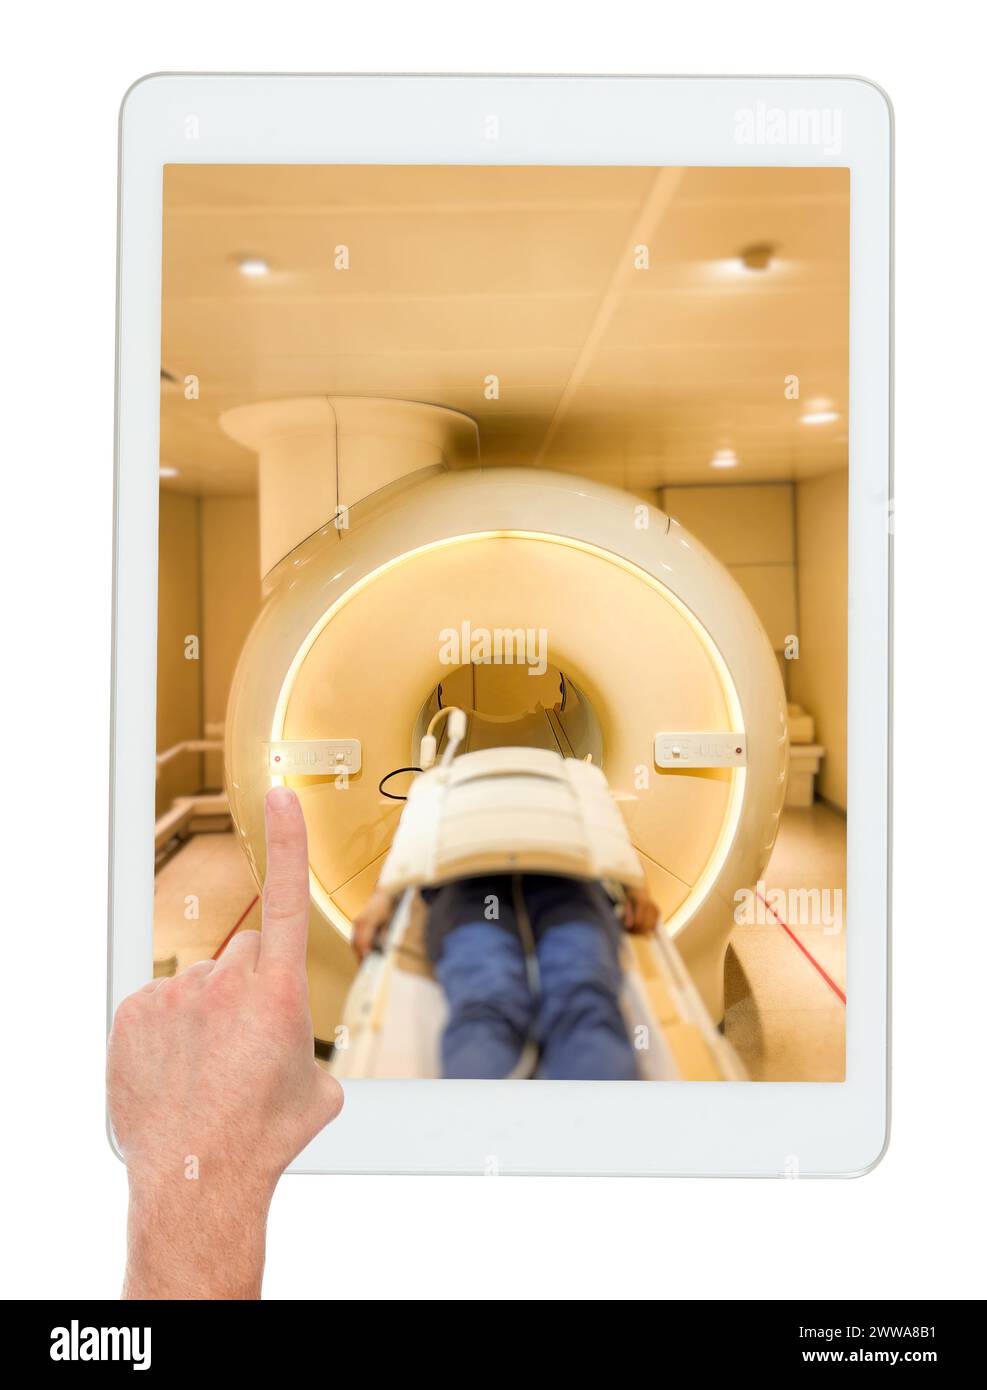 A patient lies down comfortably on the MRI scanner, undergoing a relaxing MRI scan to assess the upper abdomen on tablet isolated on white background. Stock Photo